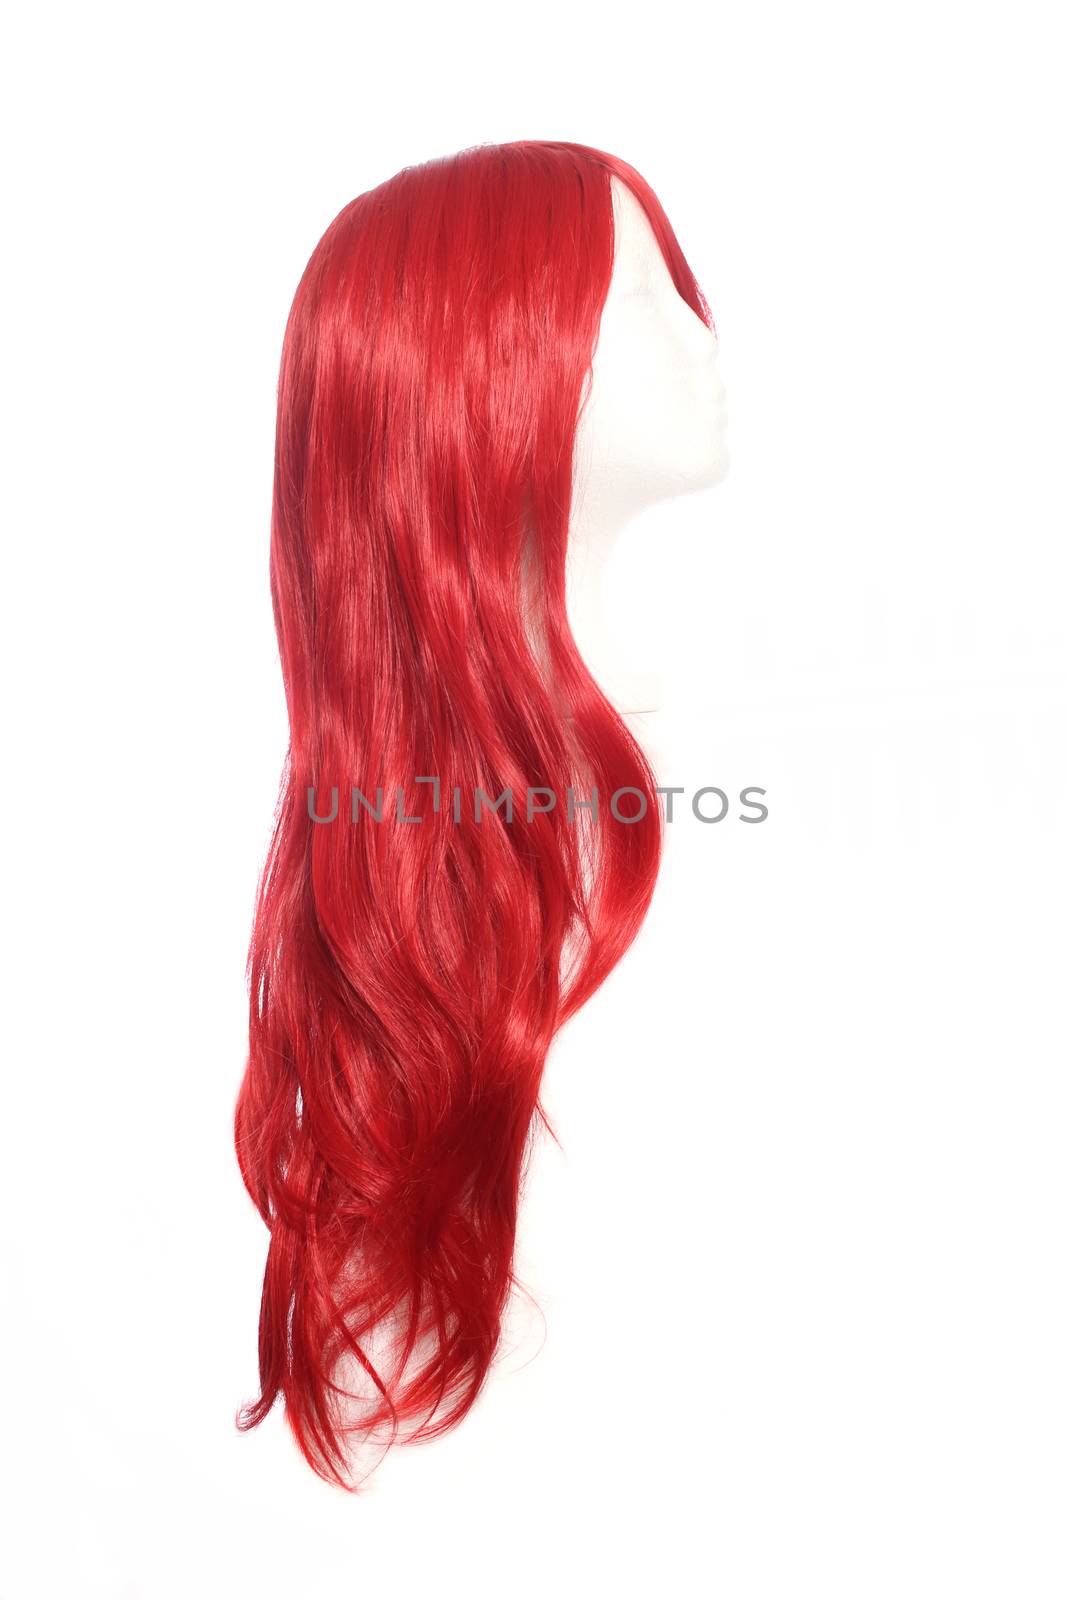 Red Wig on mannequin head isolated on white by Marti157900